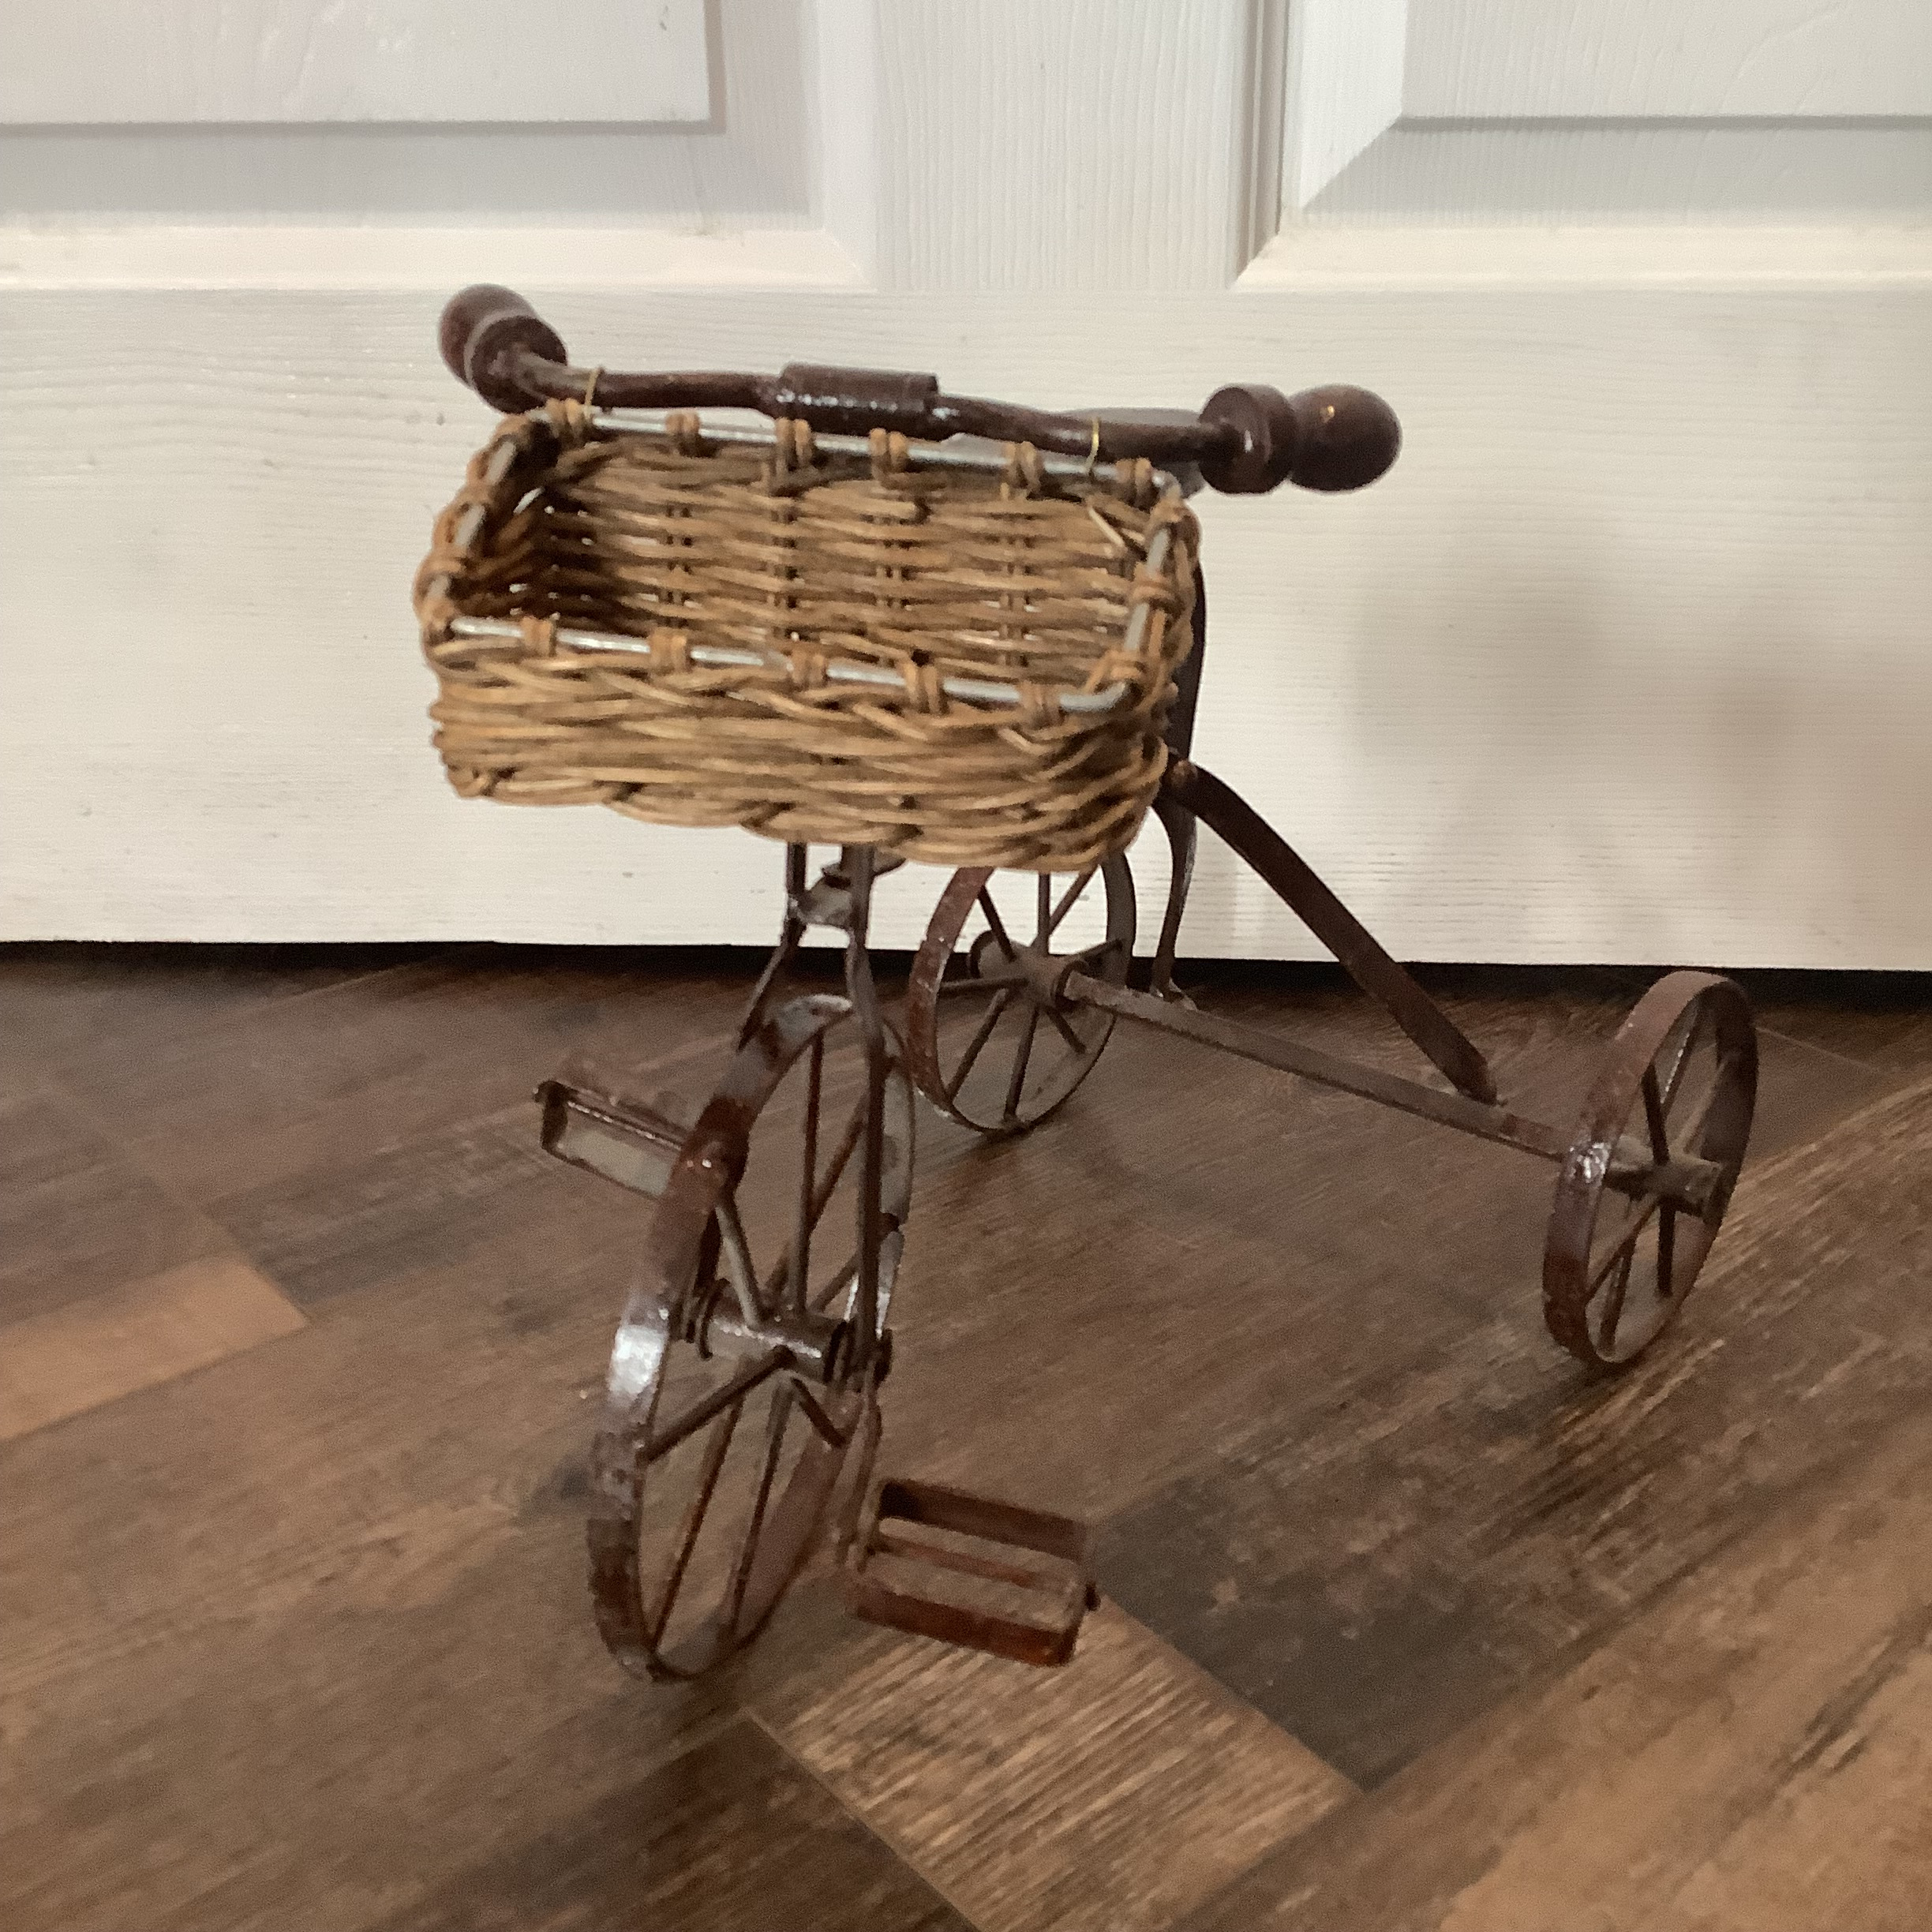 Small black tricycle with unpainted wicker basket